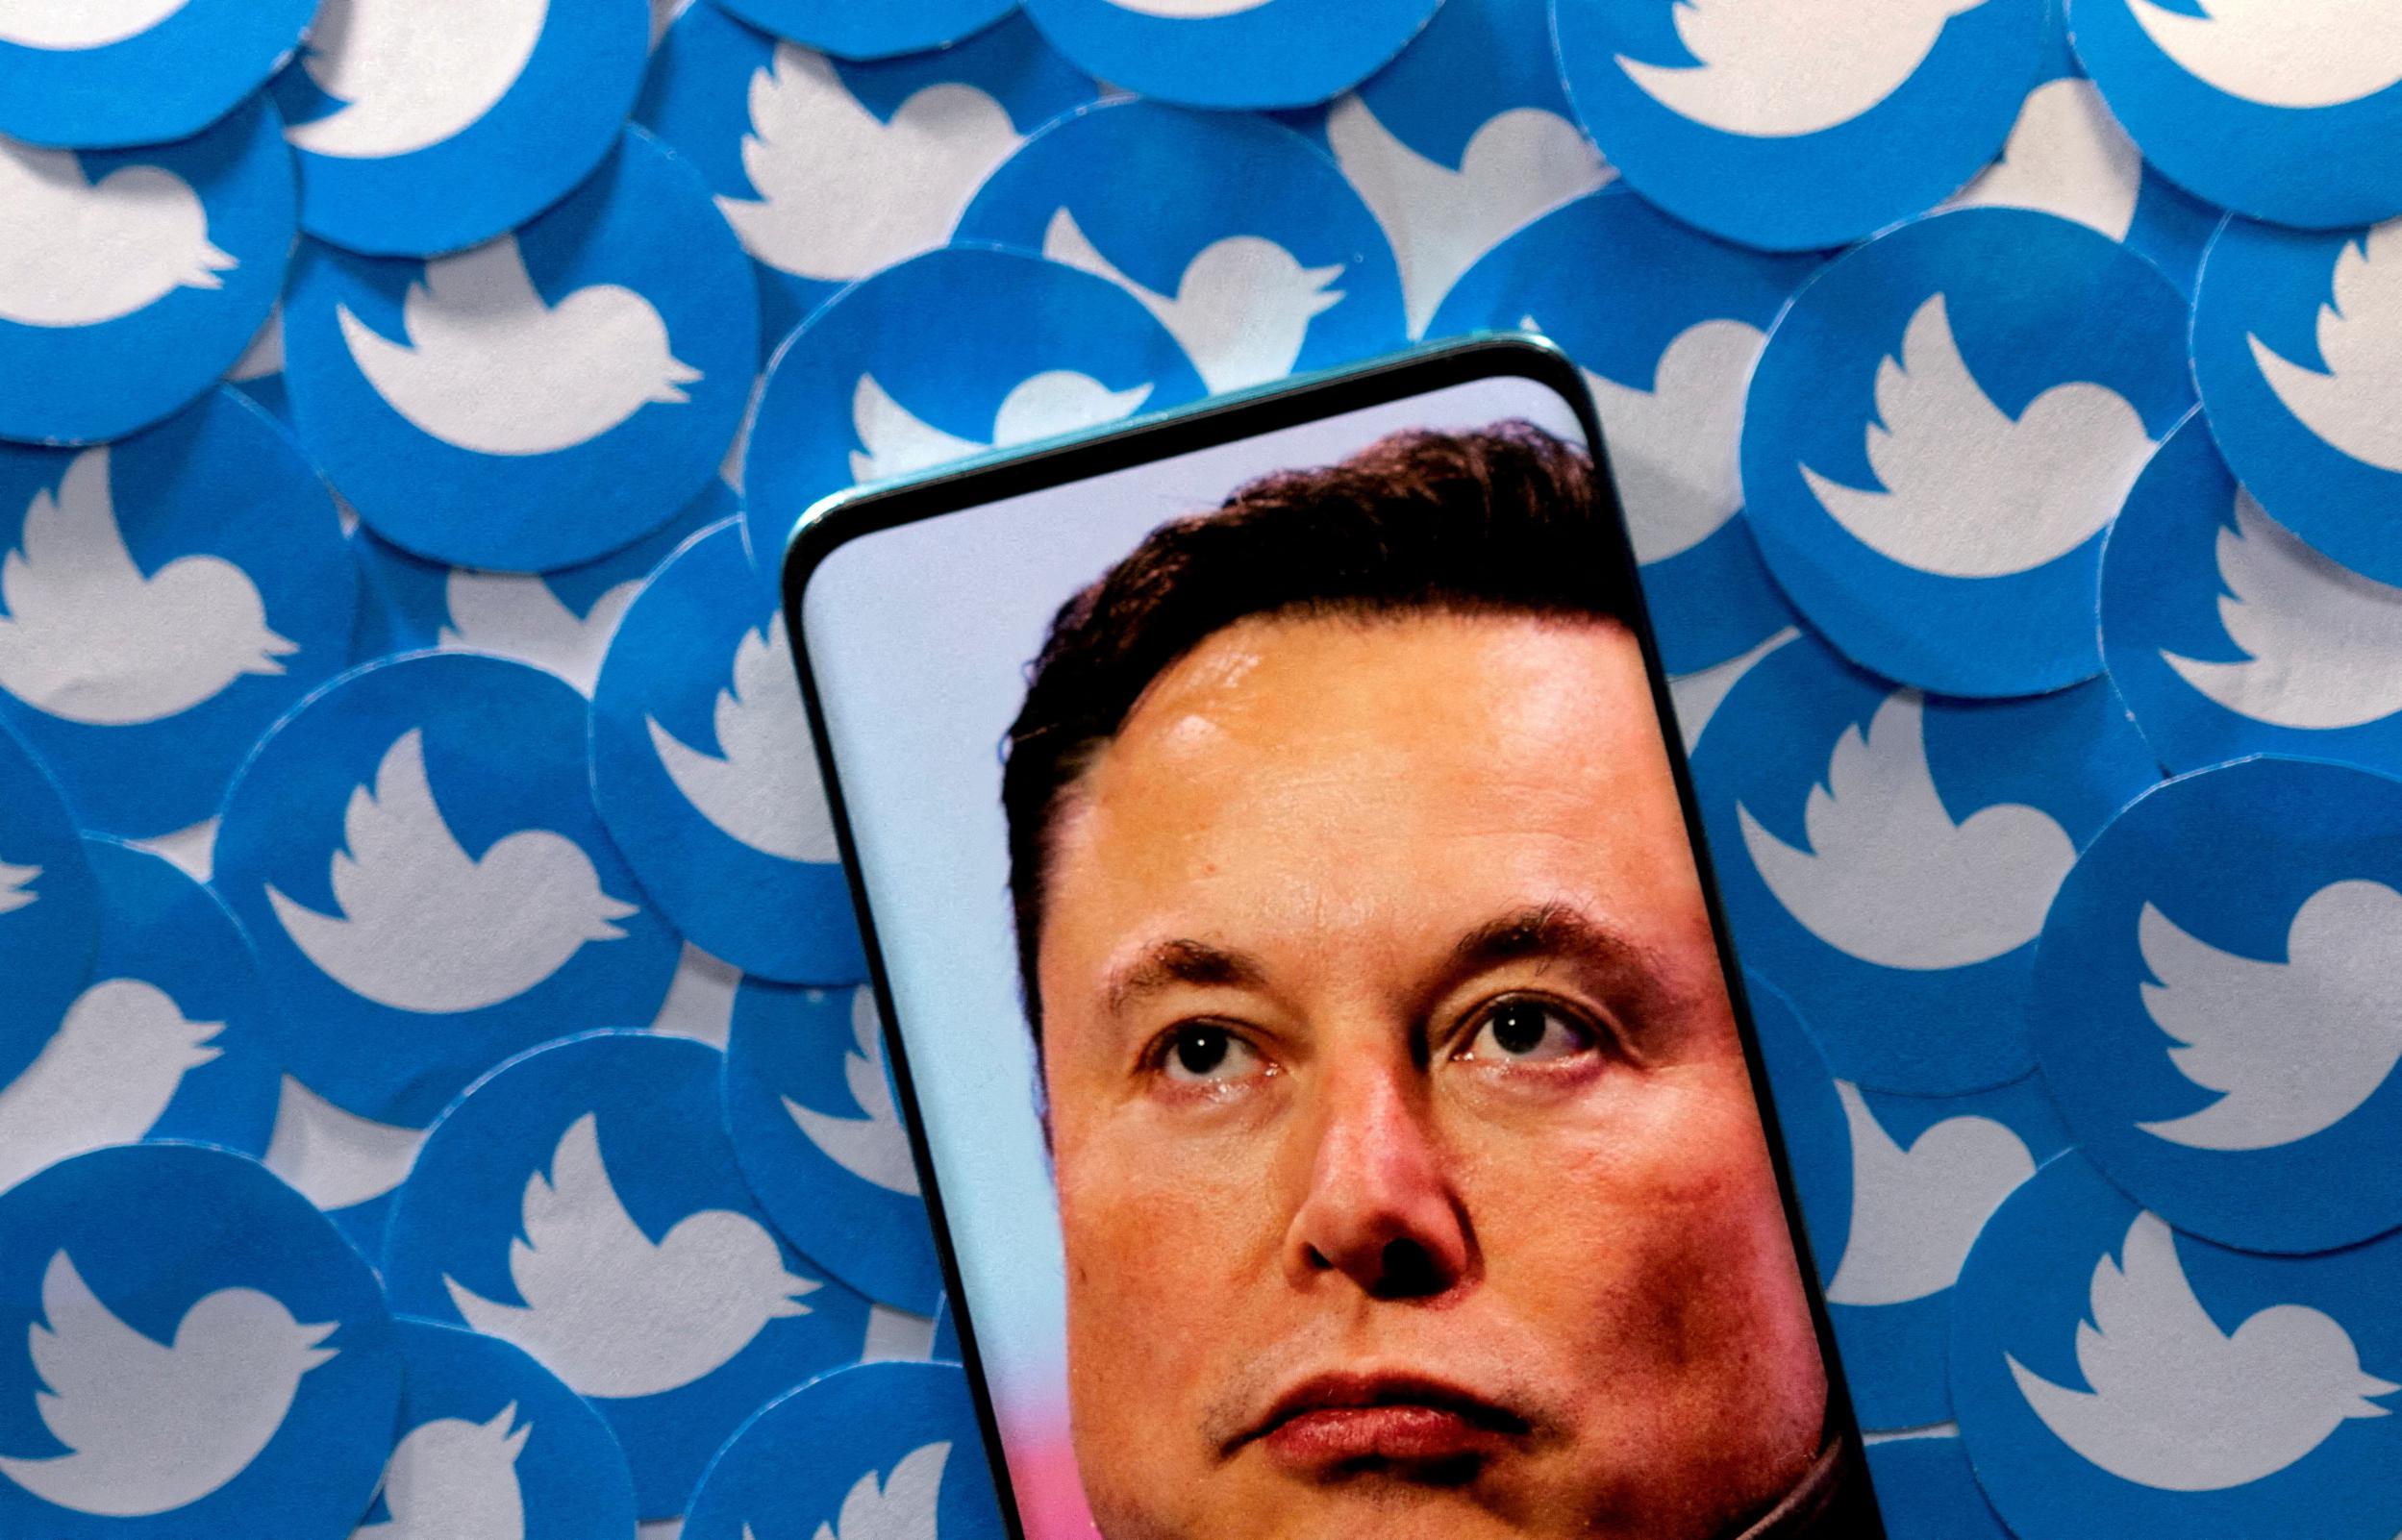 Musk forces Twitter employees to adopt 'hardcore' work style

